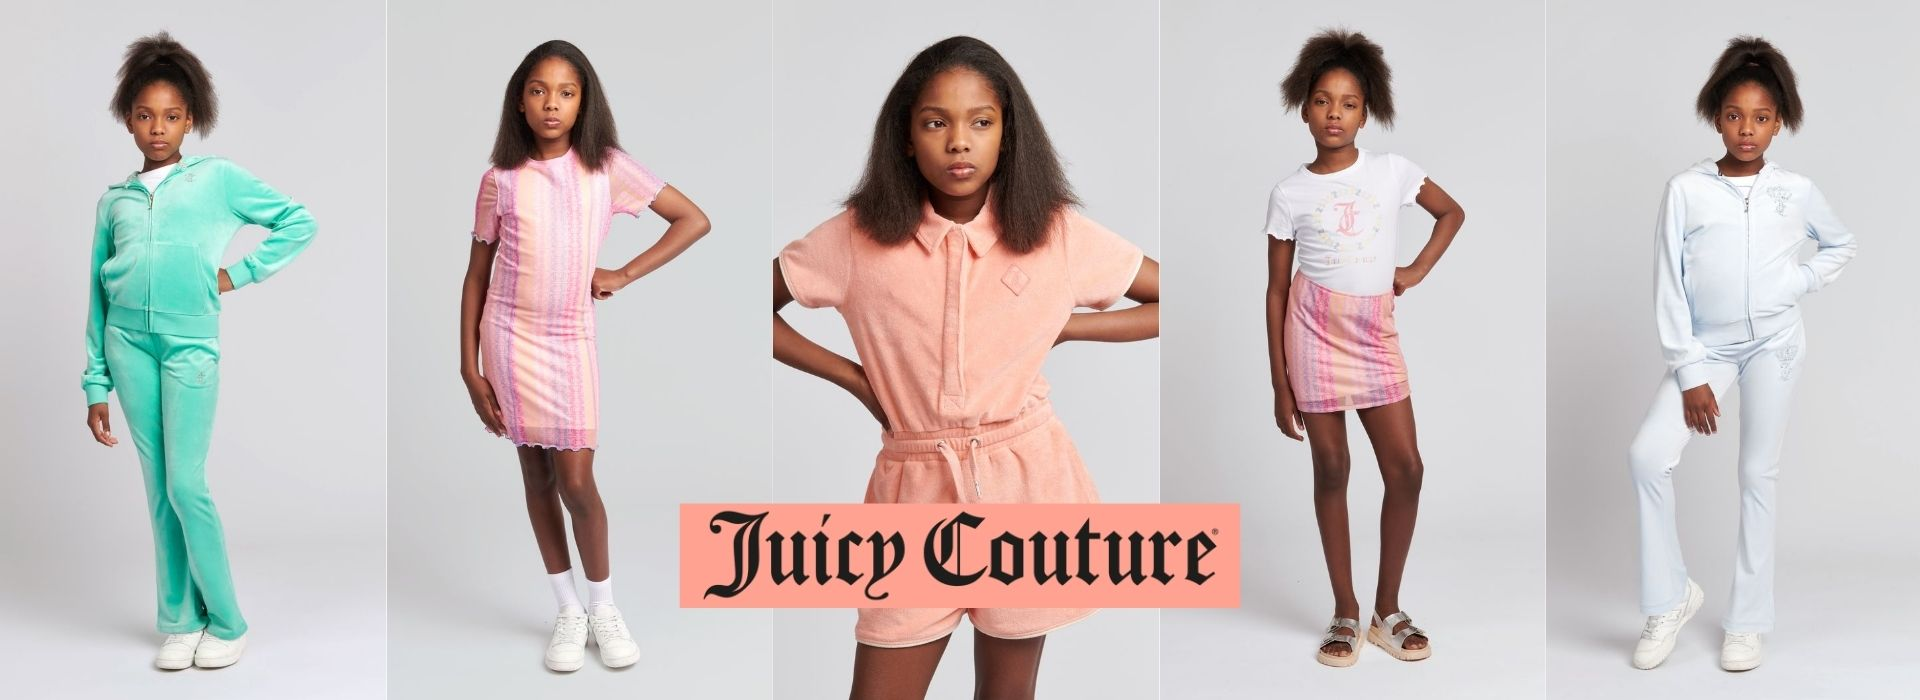 Juicy Couture Kids Clothes